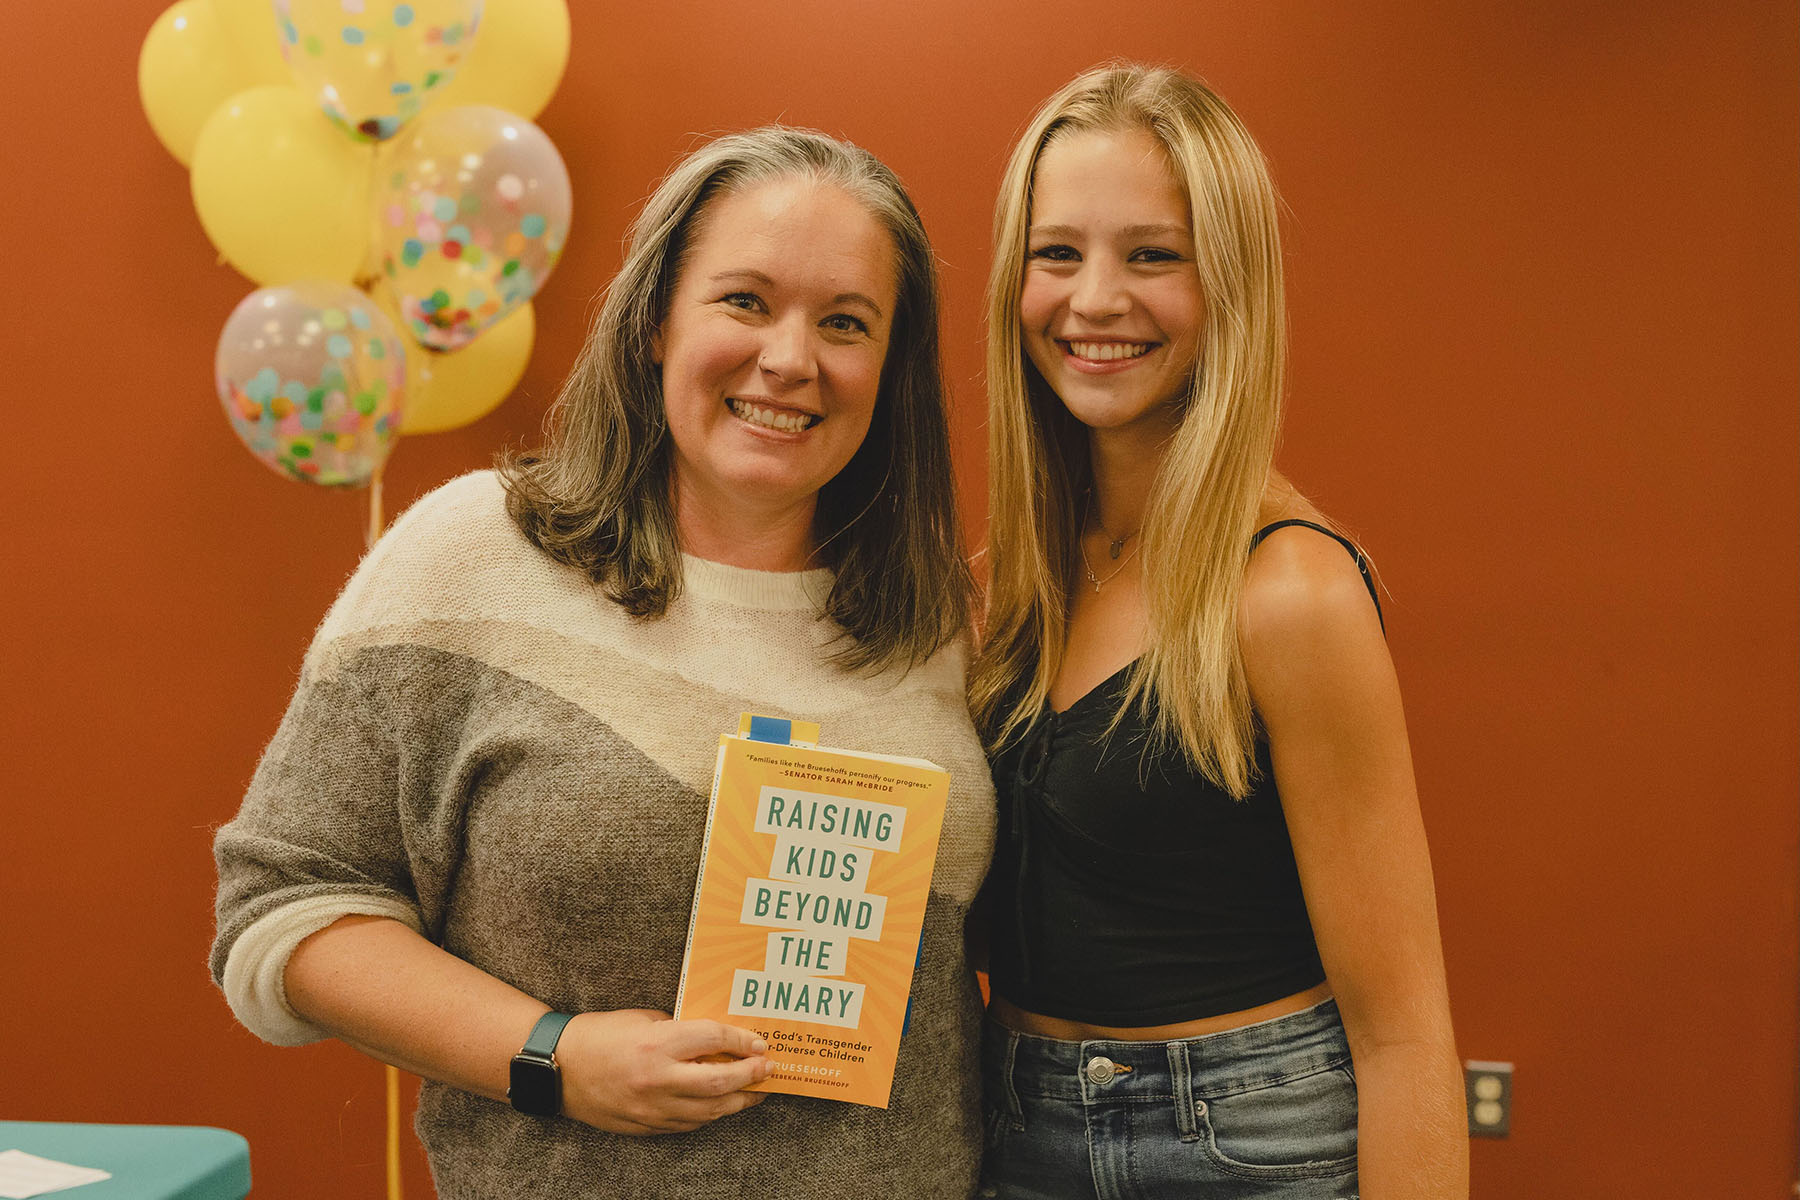 Jamie and her daughter Rebekah smile as they pose for a picture. Jamie is holding her book "Raising Kids Beyond The Binary."